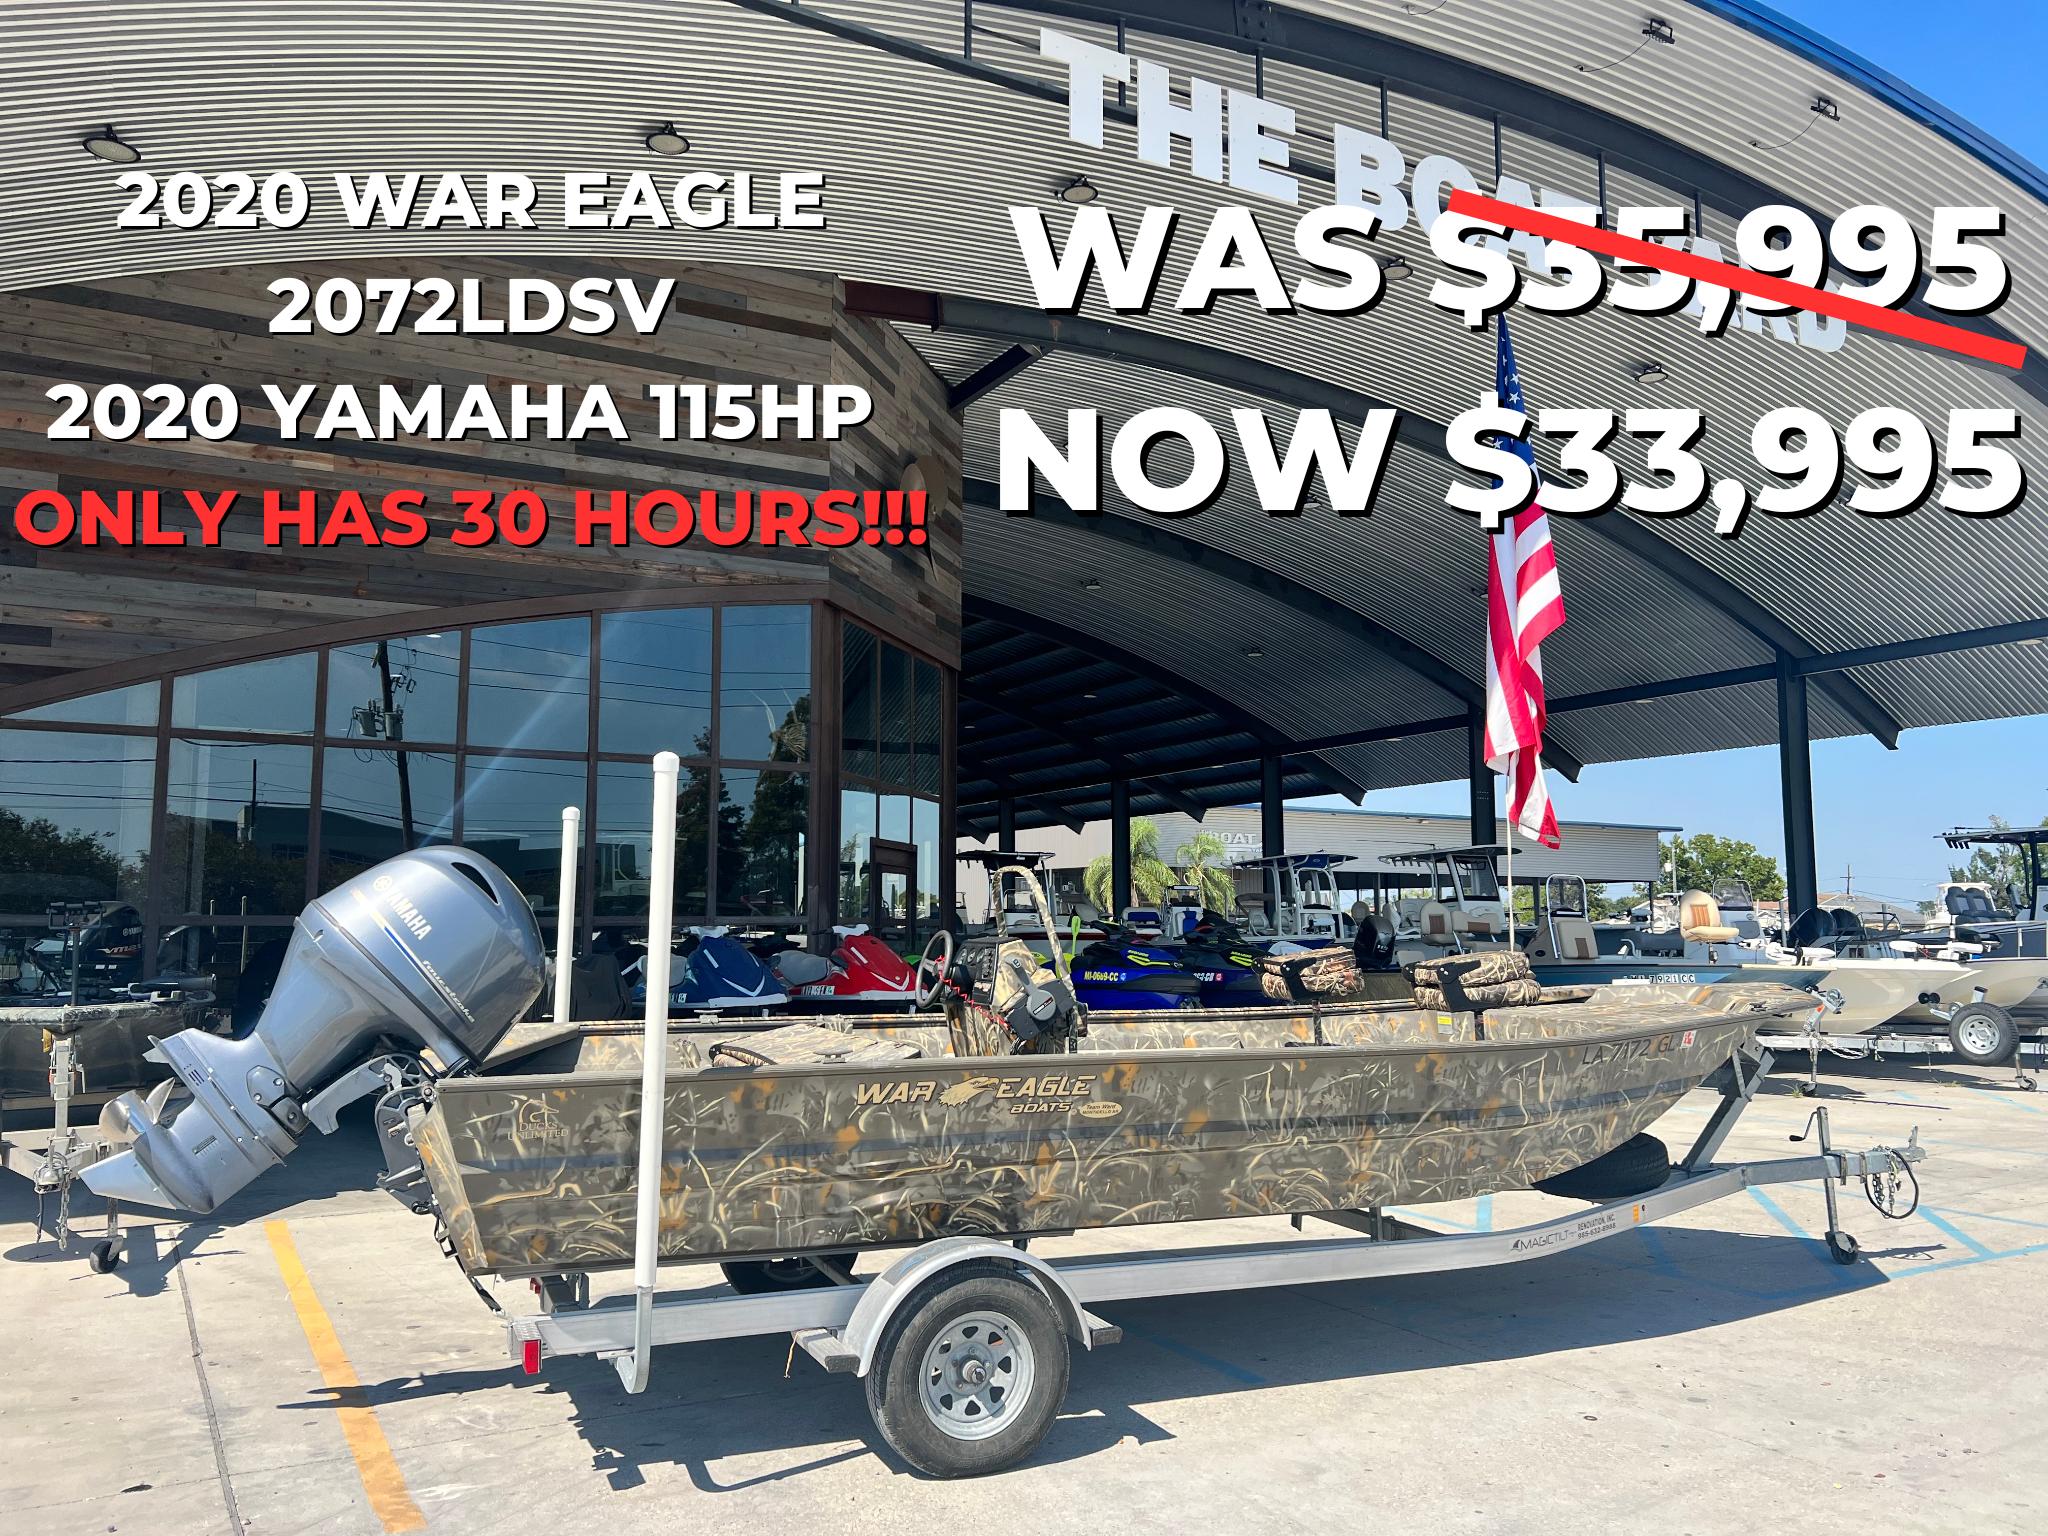 Page 2 of 3 - War Eagle boats for sale - boats.com